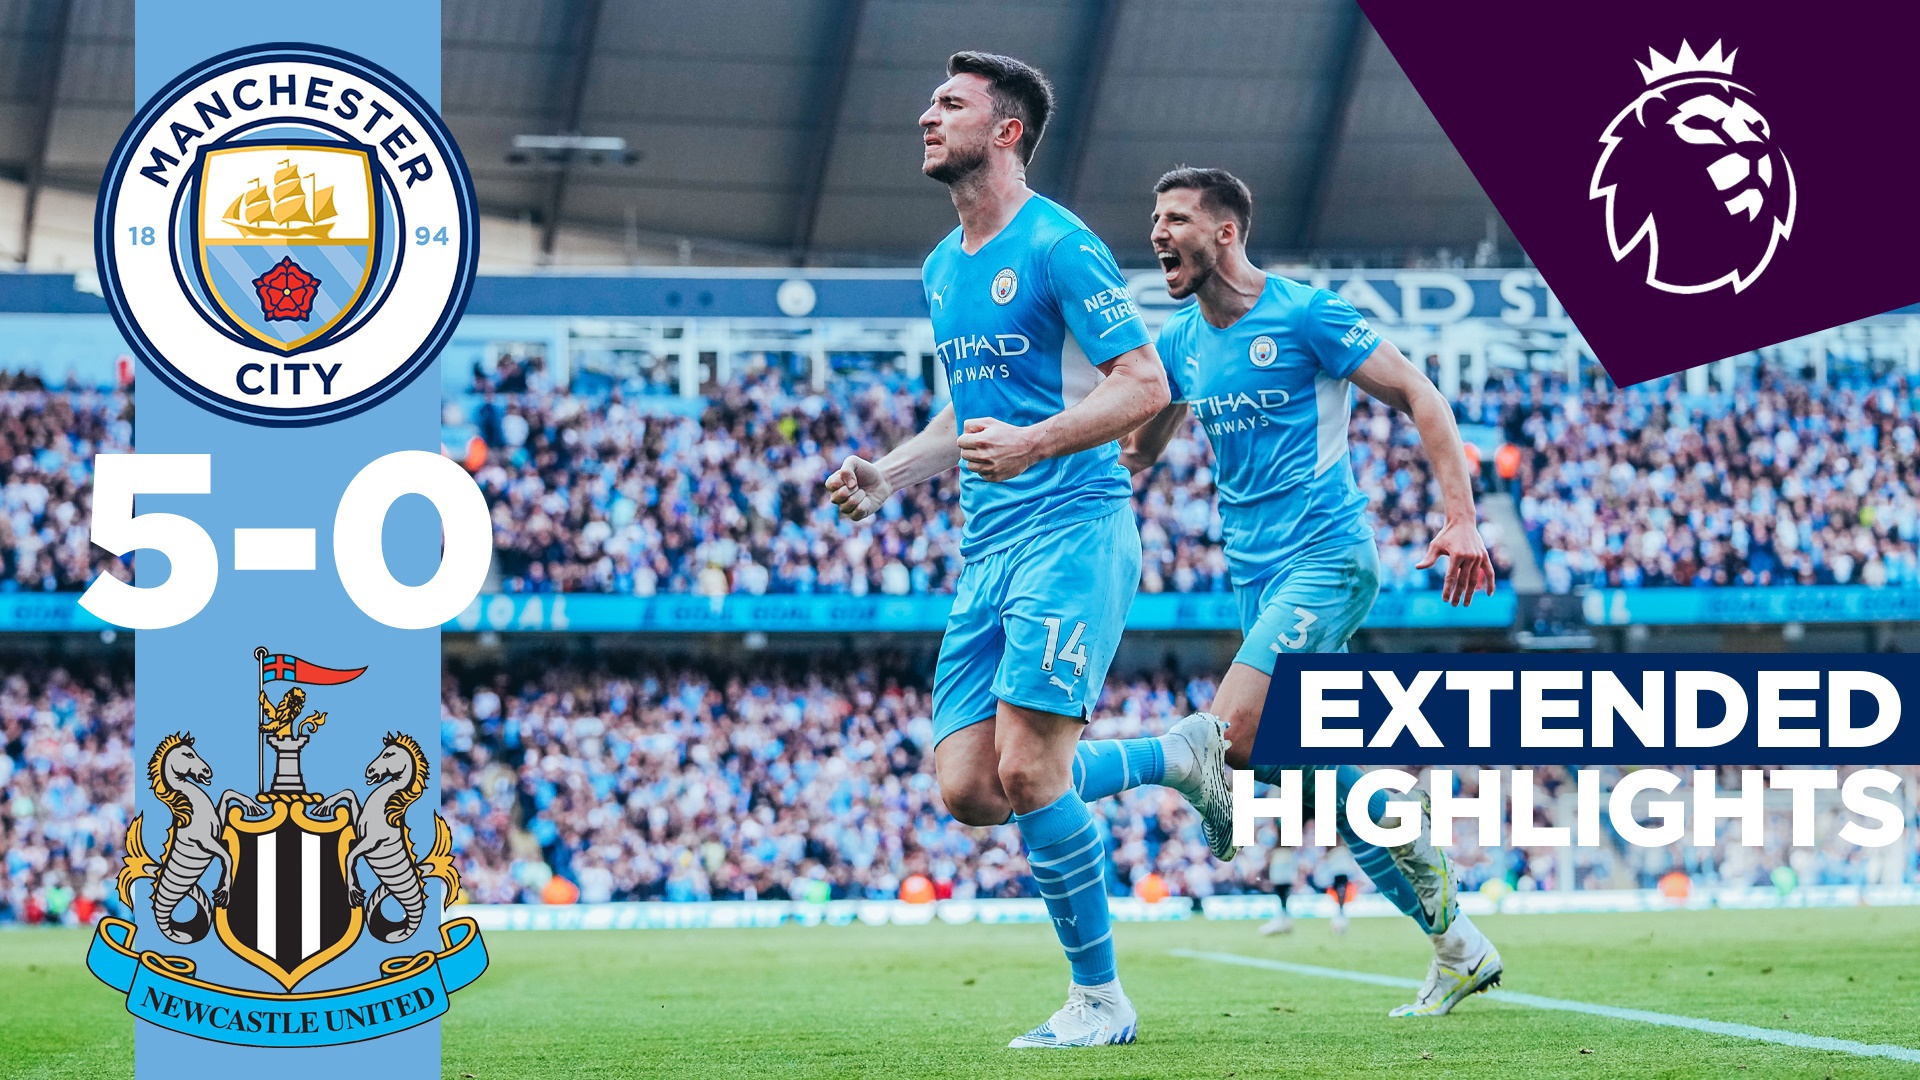 City 5-0 Extended